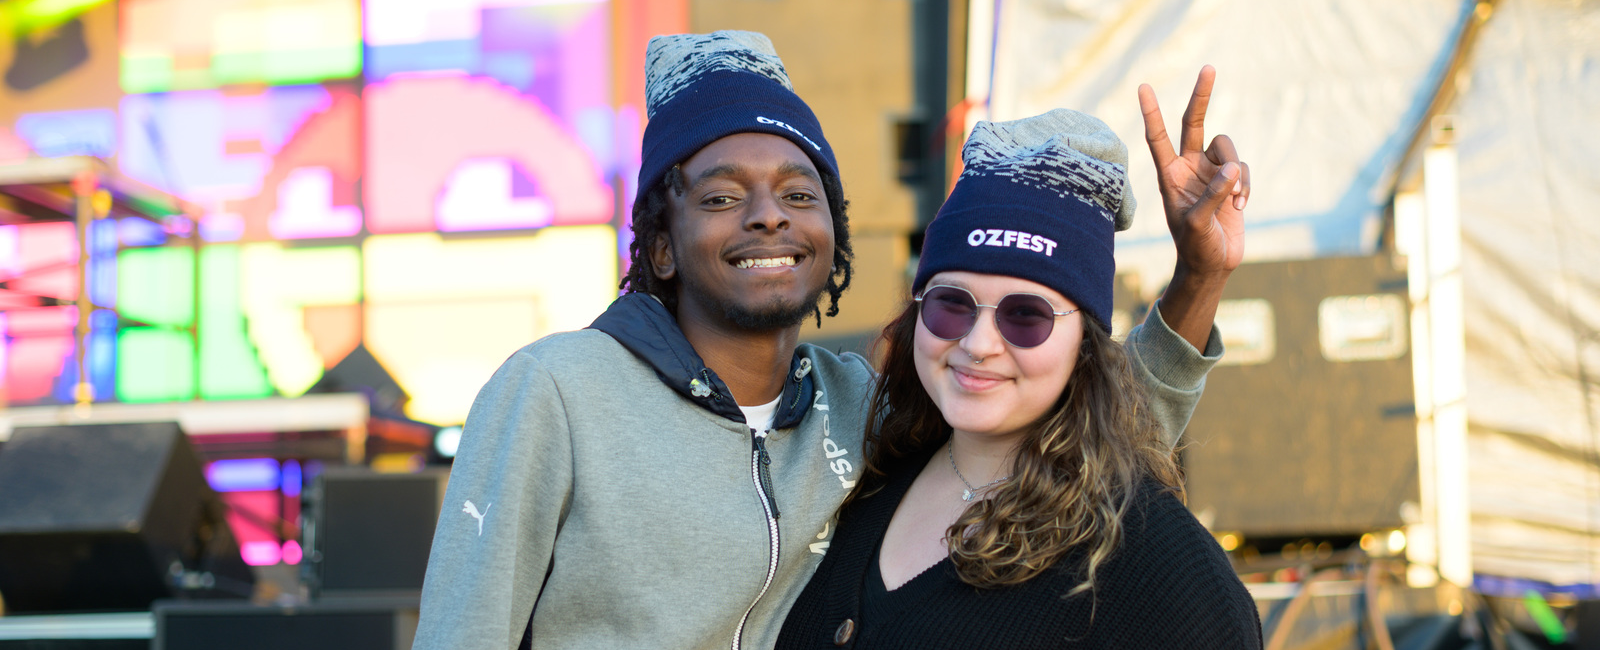 Male and female student in Oz Fest beanies with a colorful stage backdrop